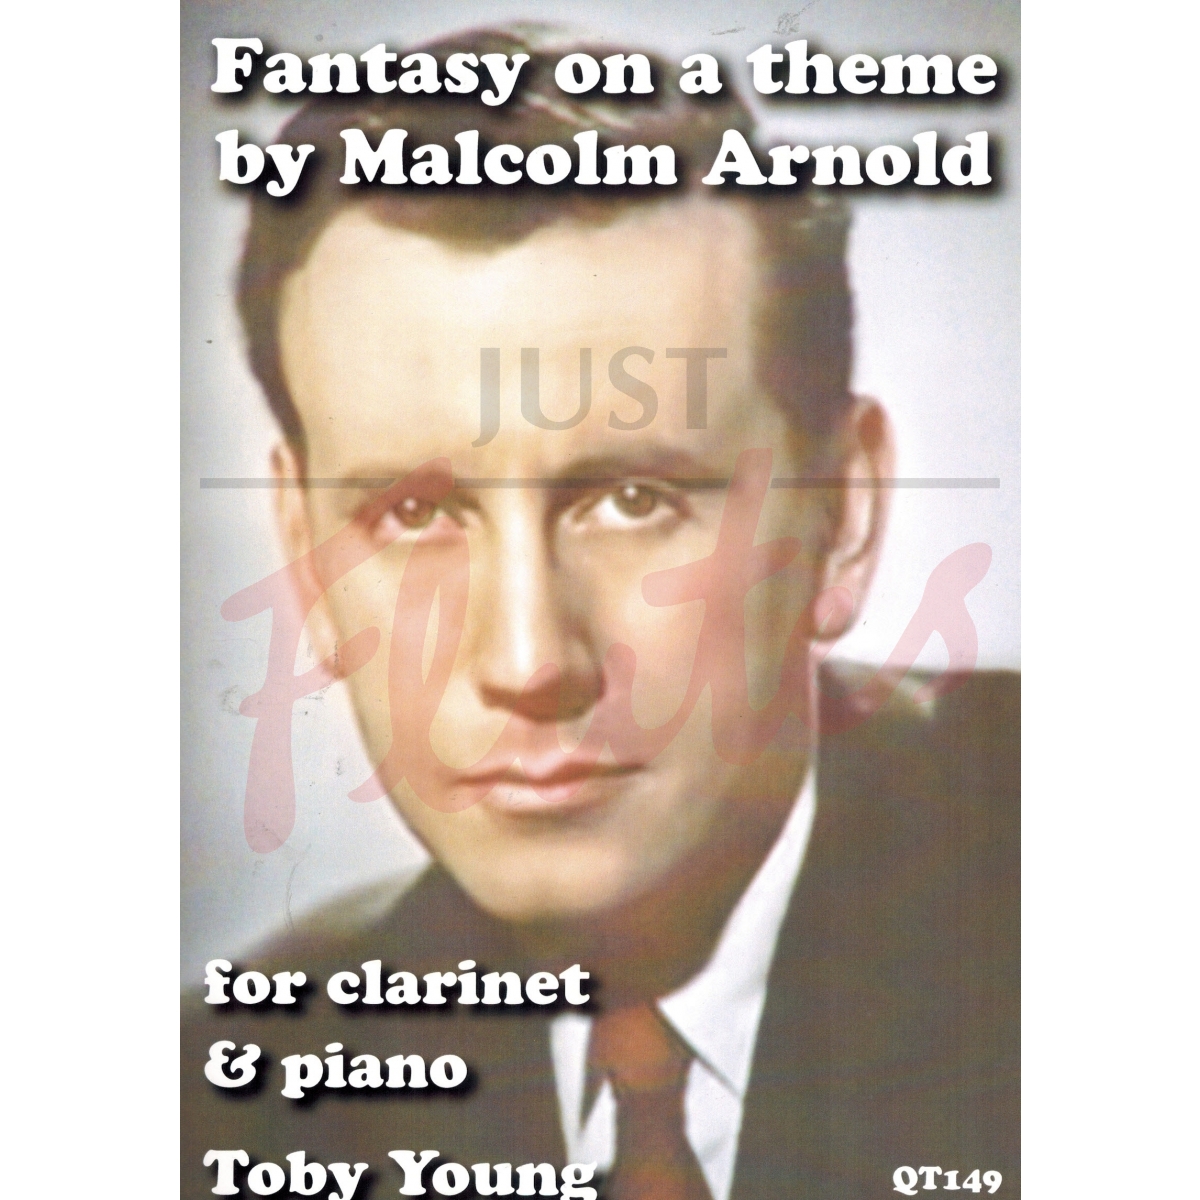 Fantasy on a theme by Malcolm Arnold